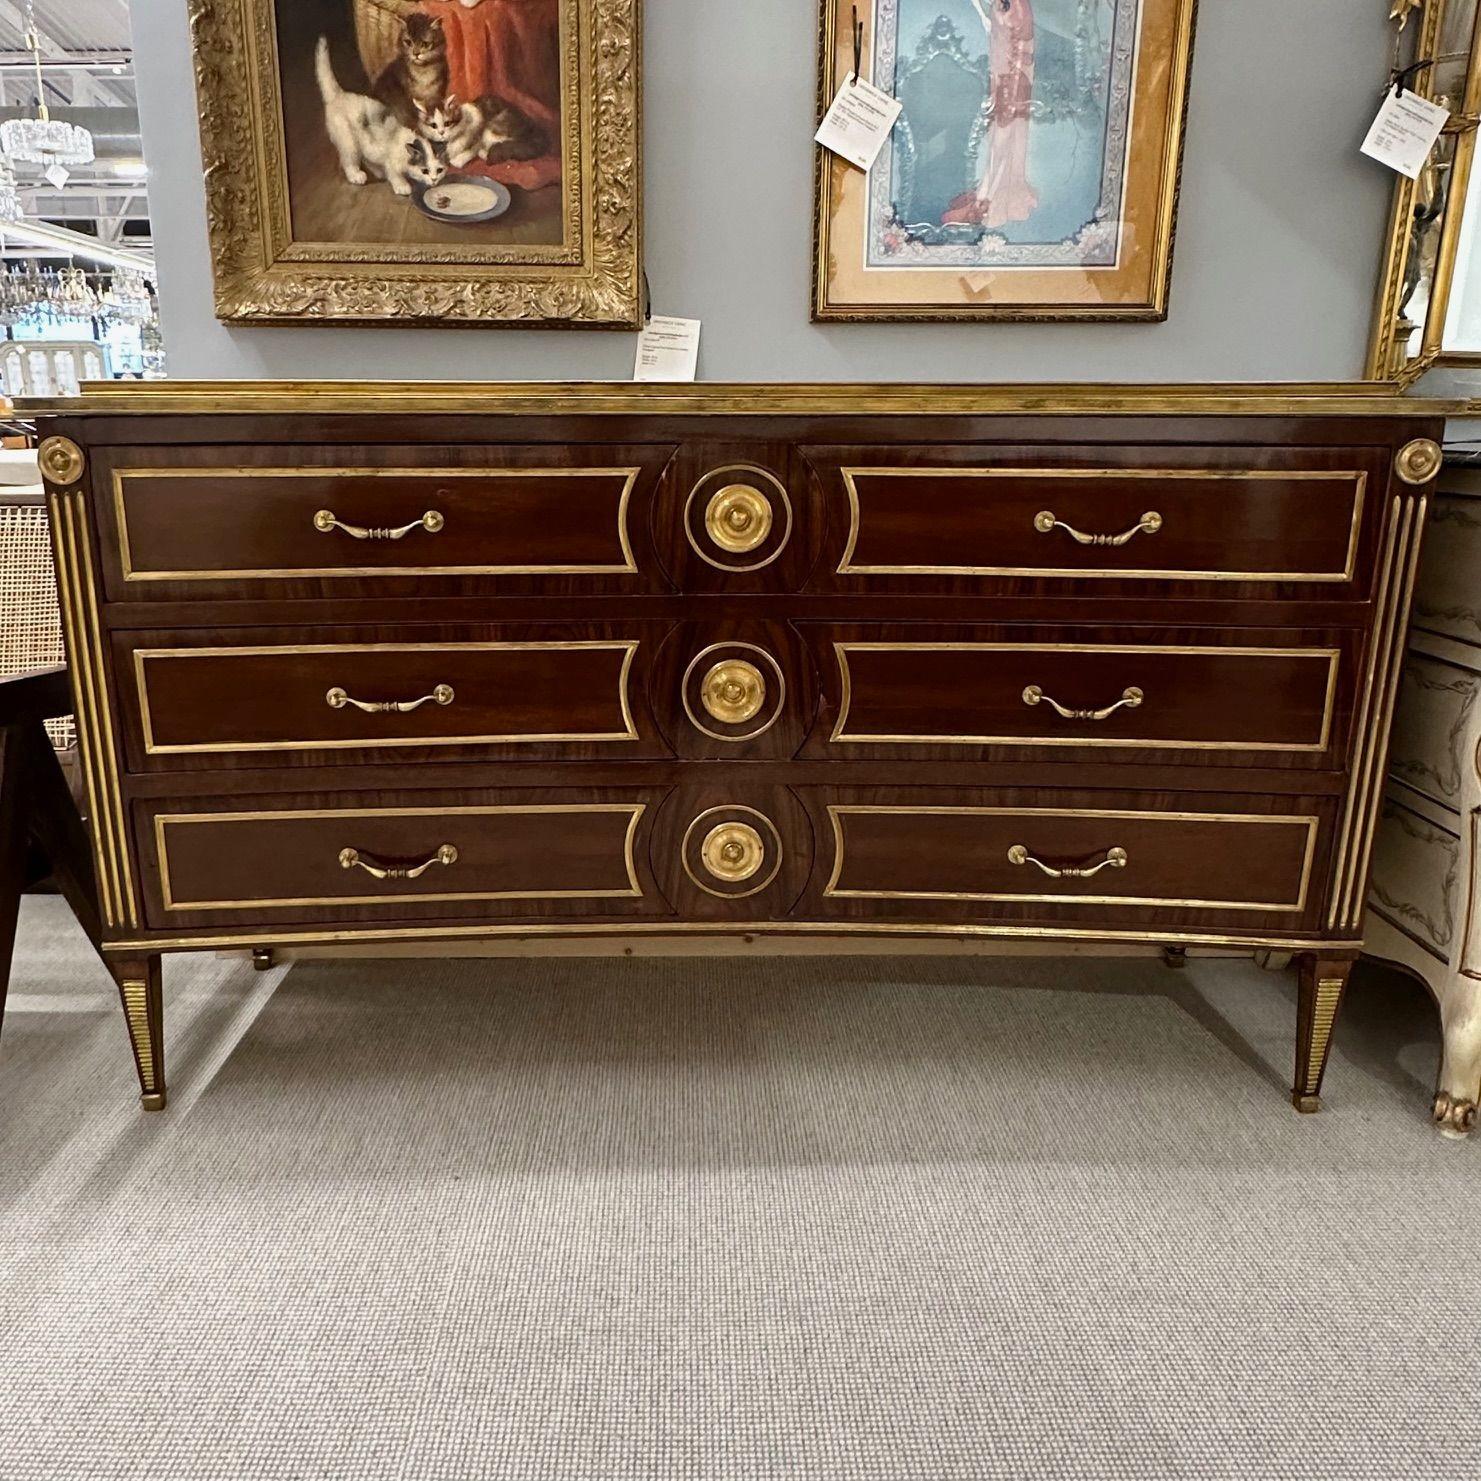 Maison Jansen Style, Russian Neoclassical, Large Commodes, Mahogany, Bronze

Large Russian Neoclassical Style Commodes or Chests, Dressers. These have to be seen to be believed. One of a kind pair of deep inverted curved front commodes in the